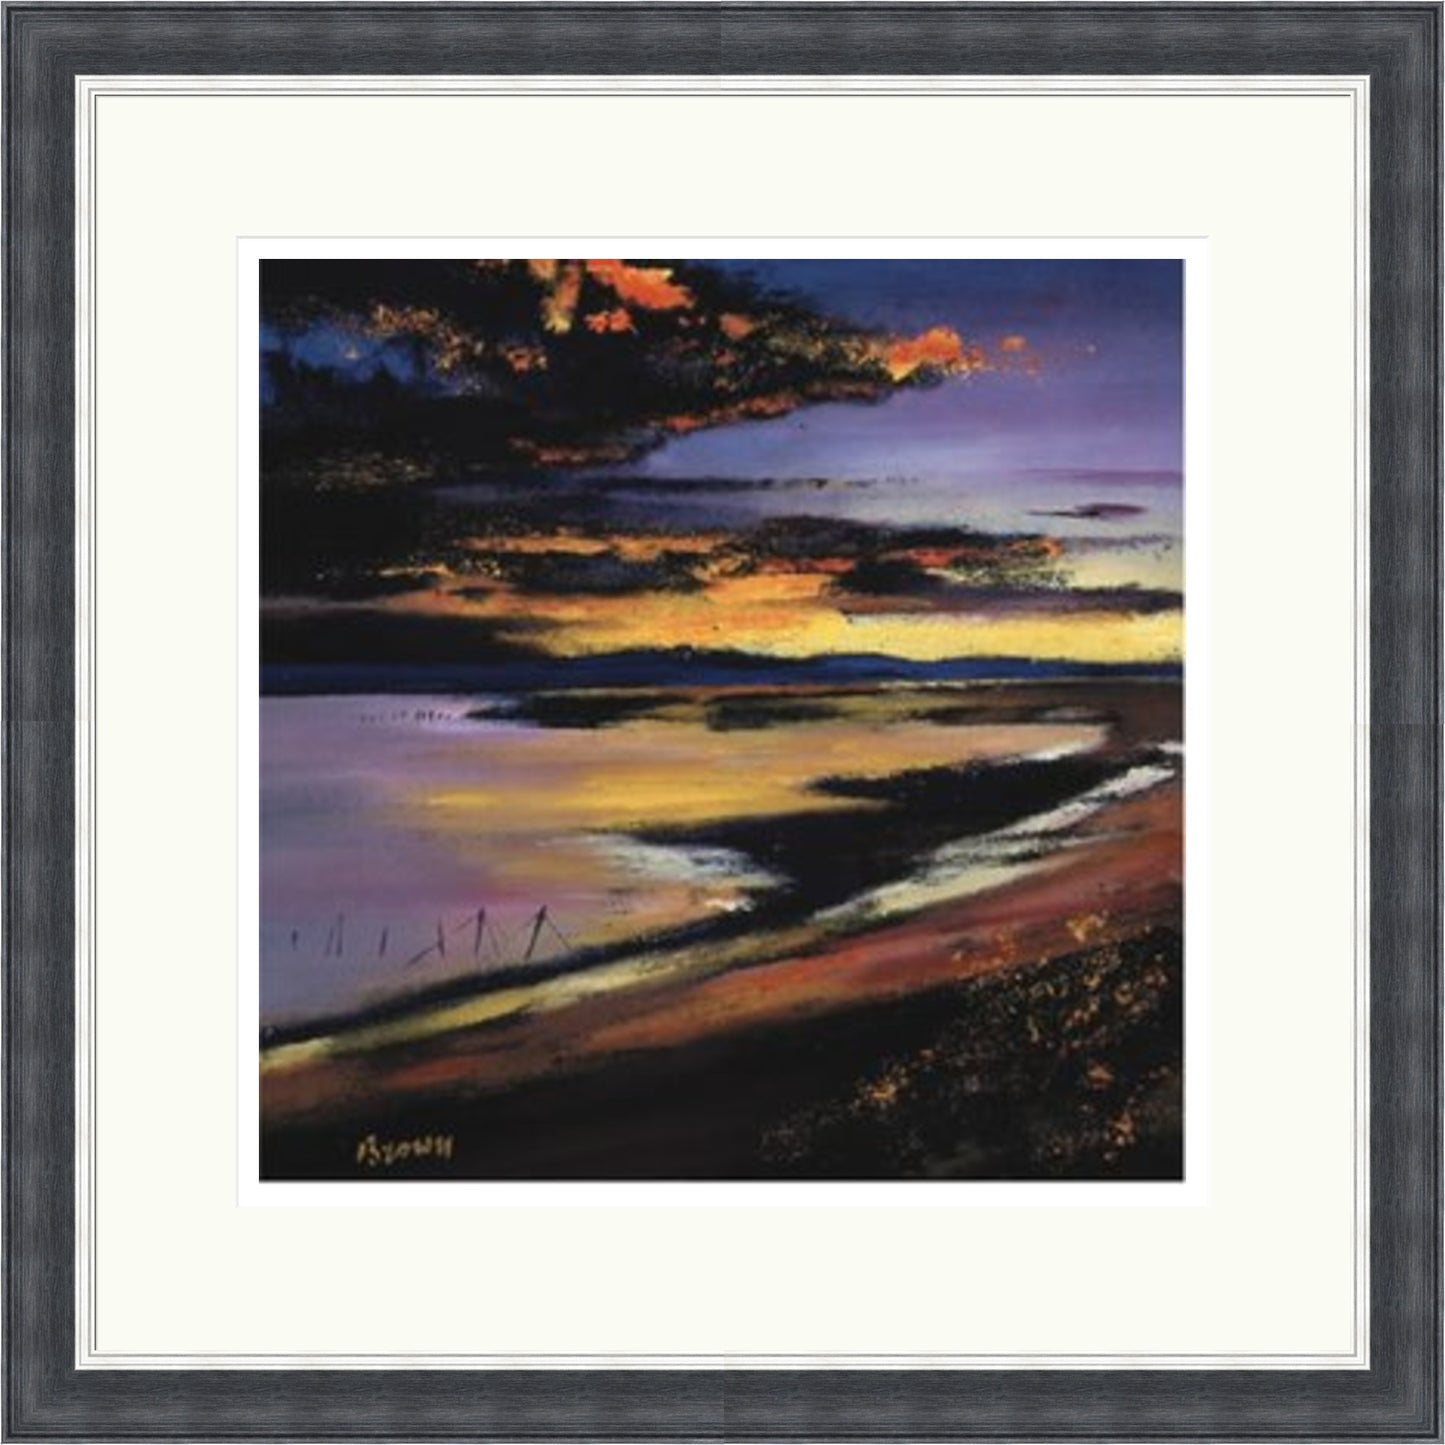 Last One - Cree Estuary Sunset (Signed Limited Edition) by Davy Brown